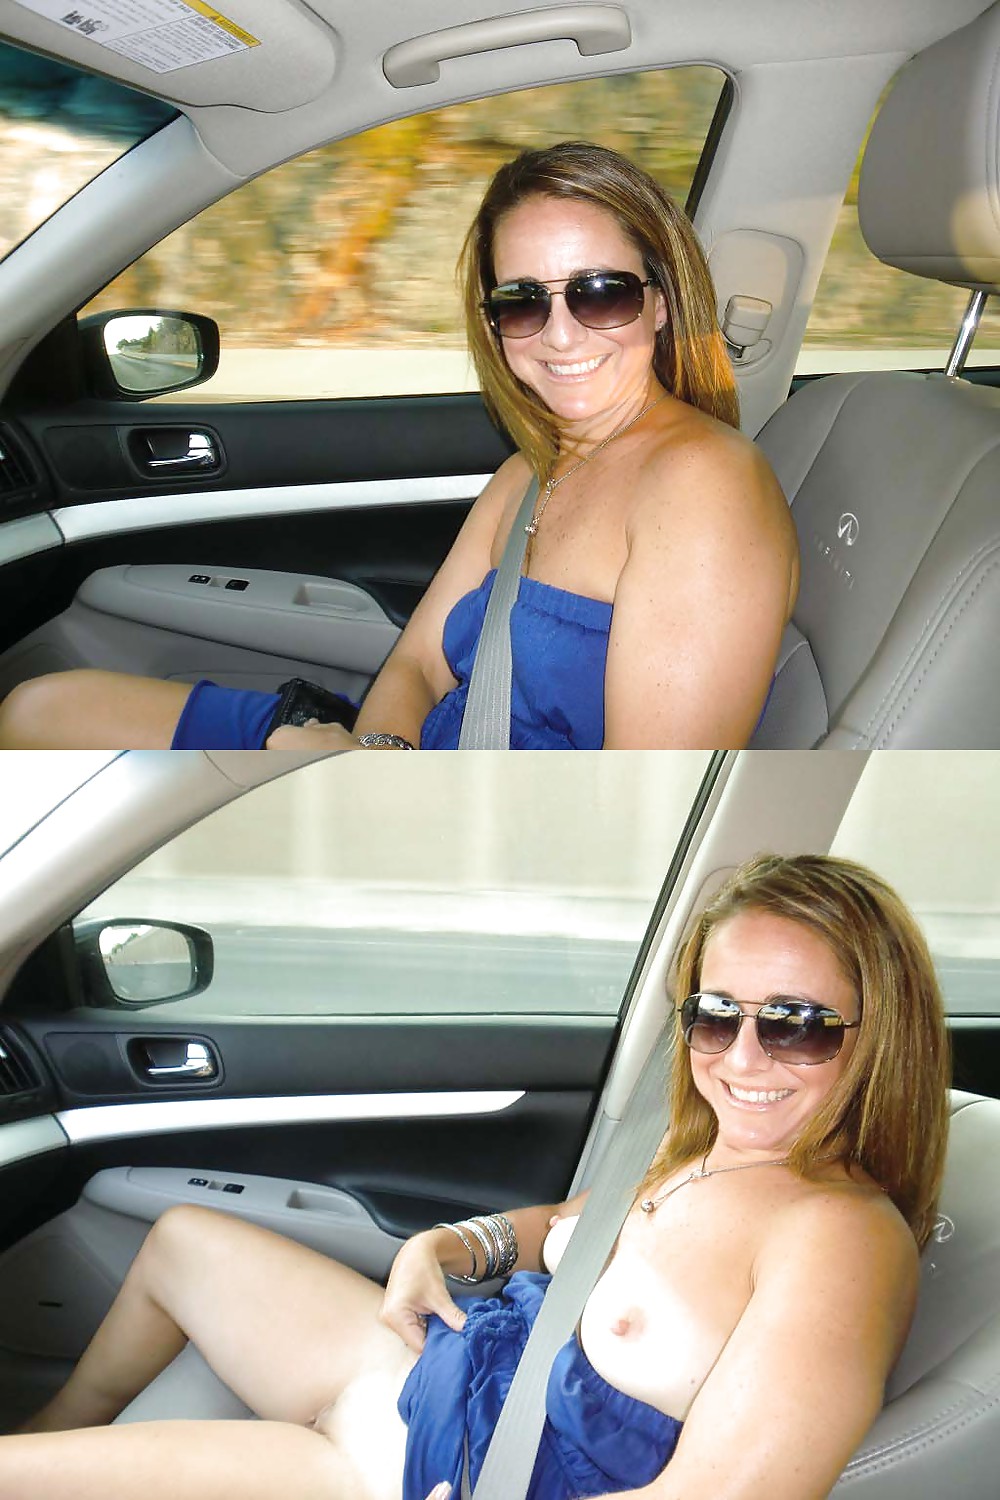 GIRLS IN CARS: MORE TITS & PUSSY porn pictures